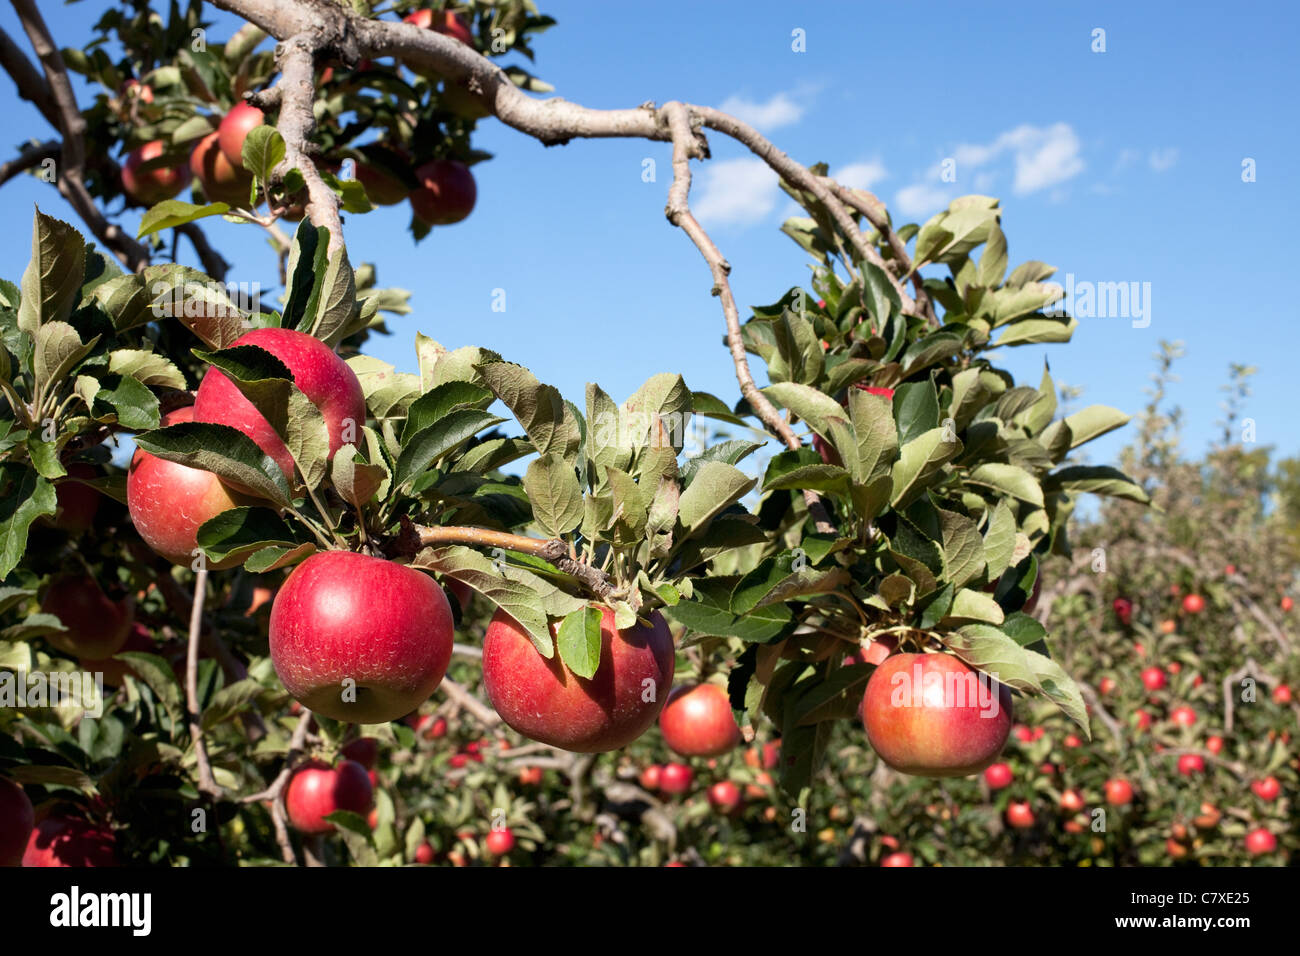 Canada,Ontario,Vineland, ripe red apples on a apple tree branch Stock Photo